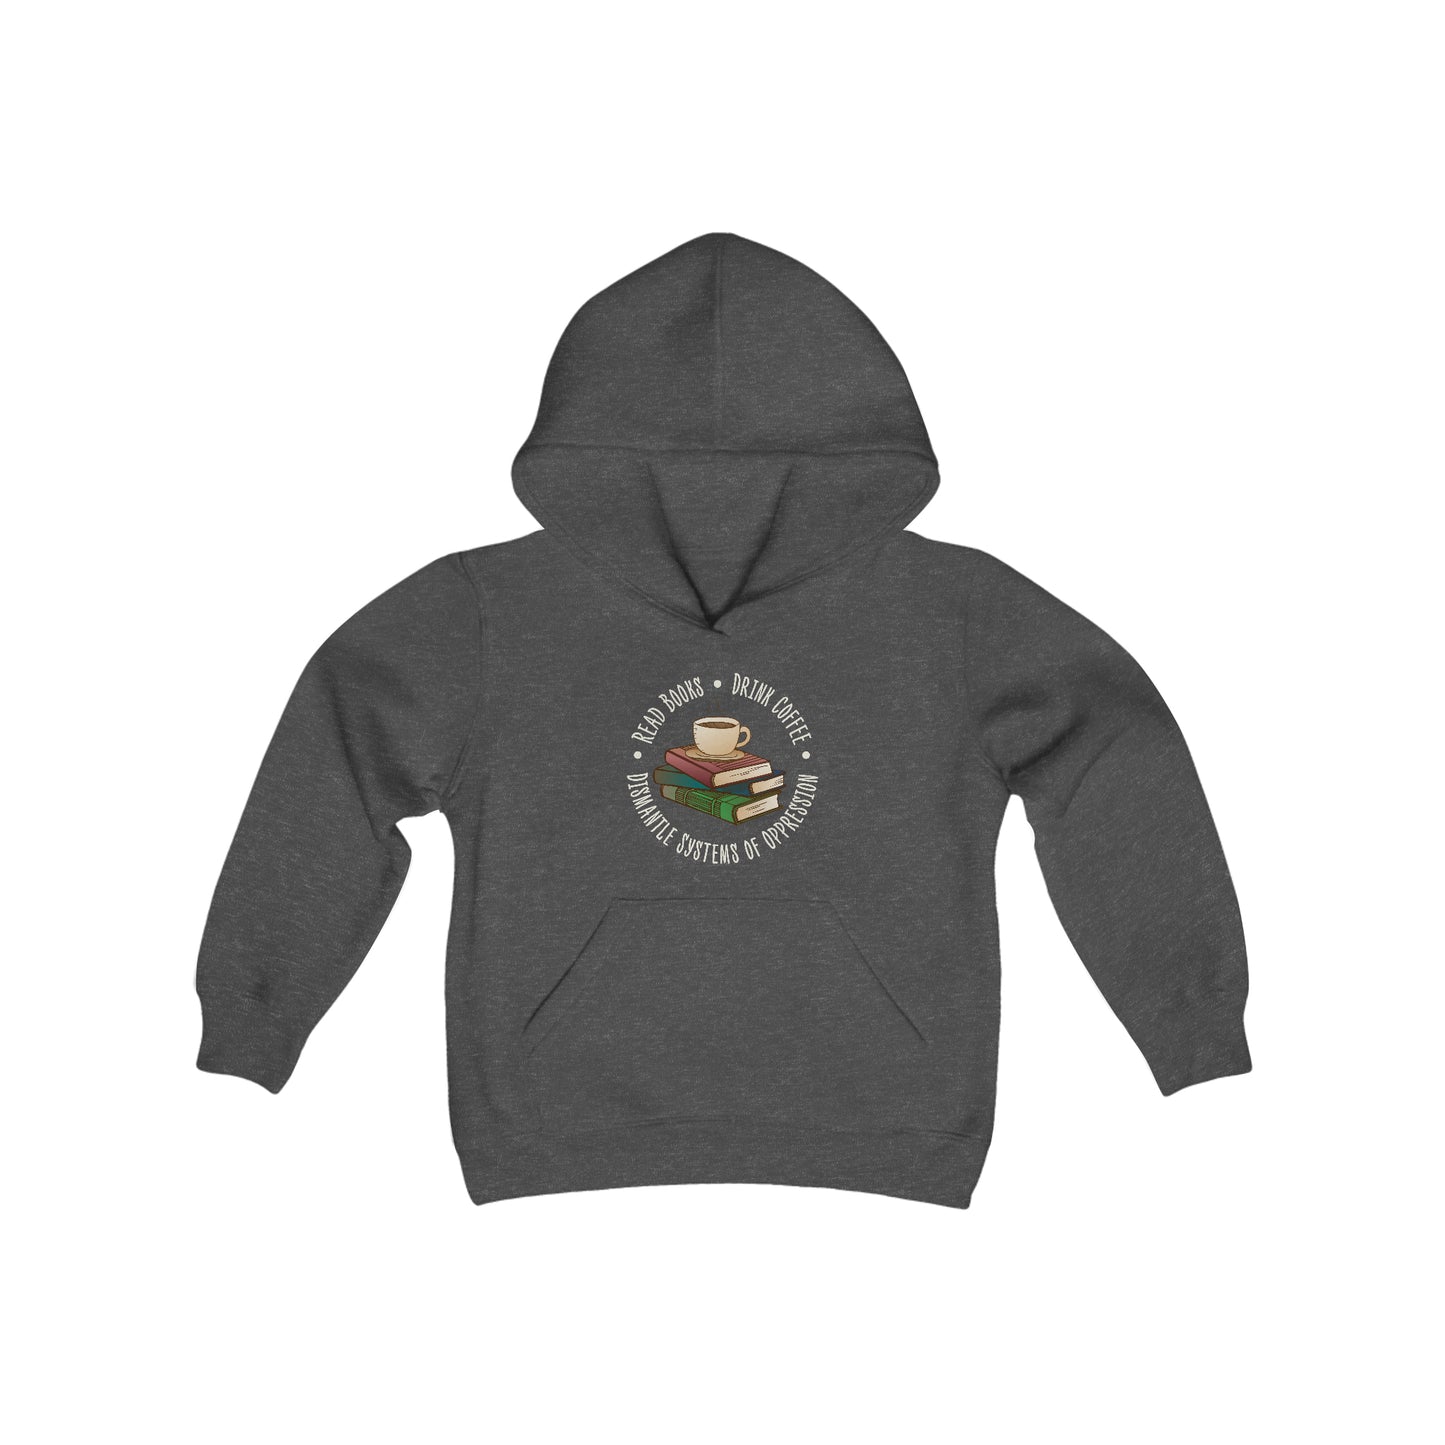 “Dismantle Systems of Oppression” Youth Hoodie